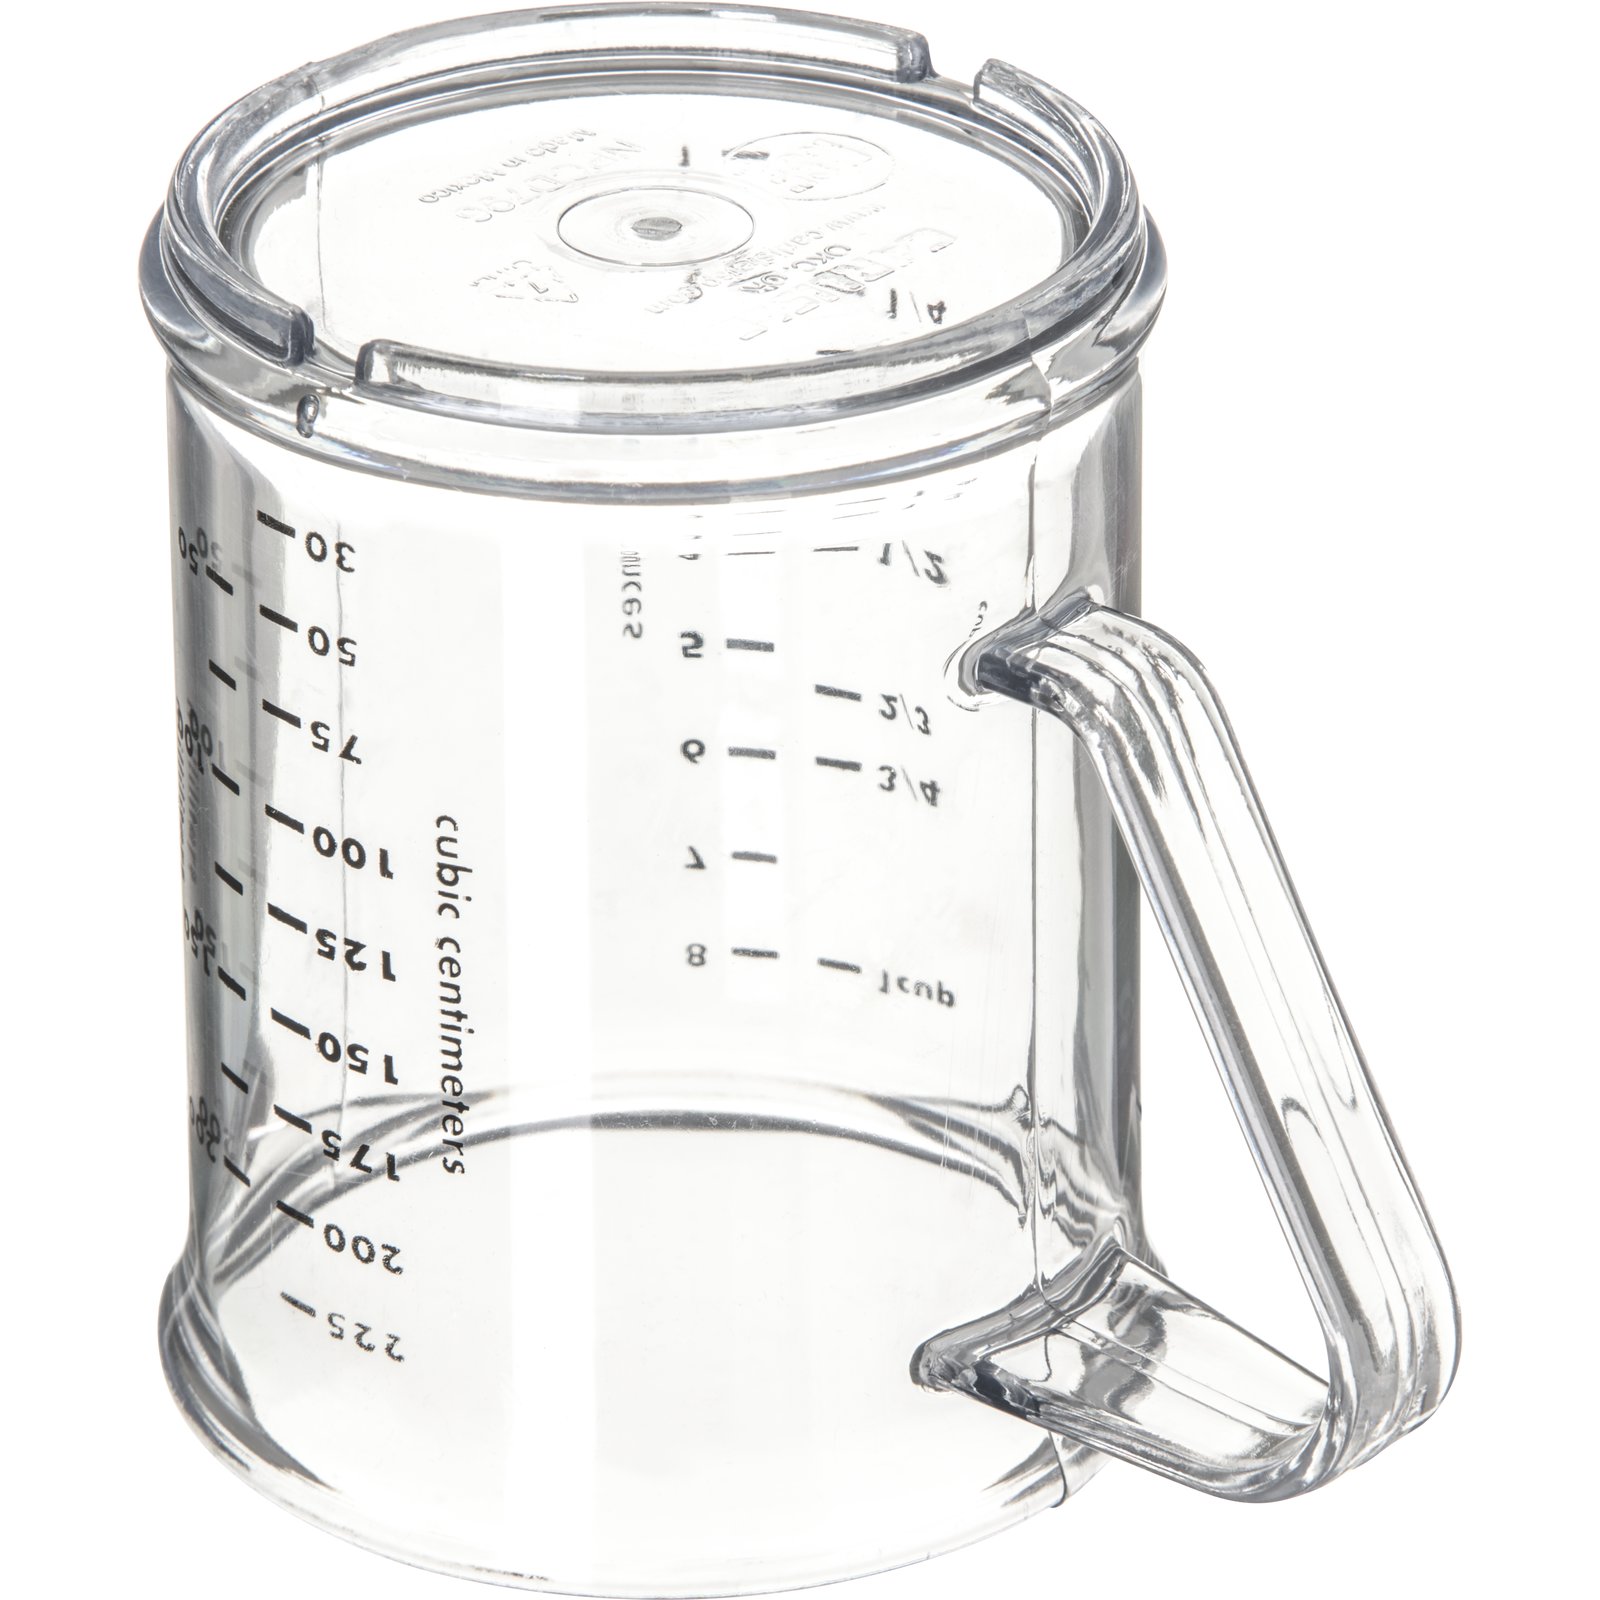  1 8 cup measuring 30ml measuring cup 15×6×4 2pcs